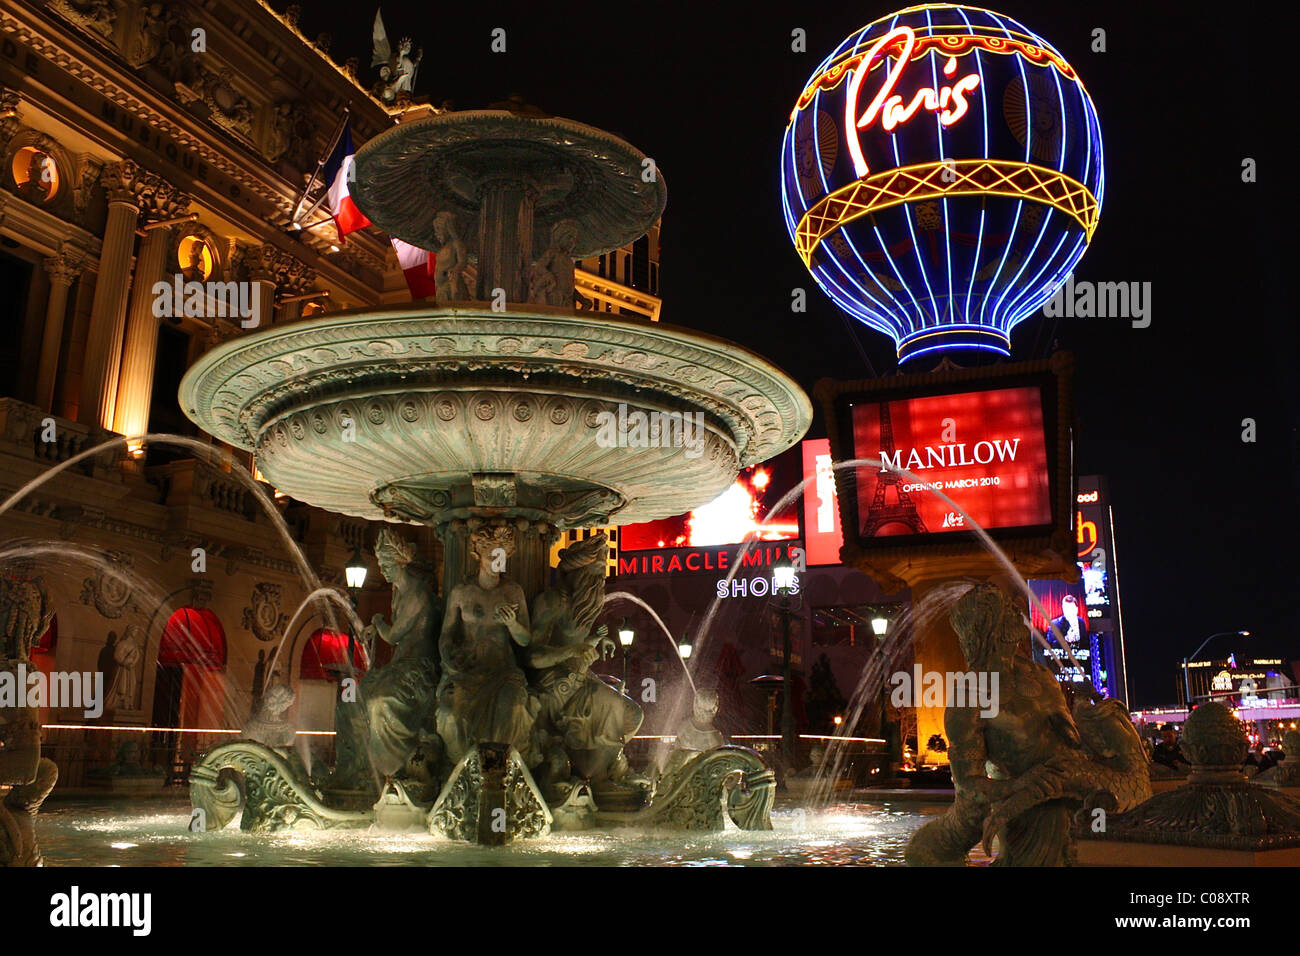 A lighted fountain and a sign in the shape of a balloon at the Paris Las Vegas Hotel and Casino Stock Photo